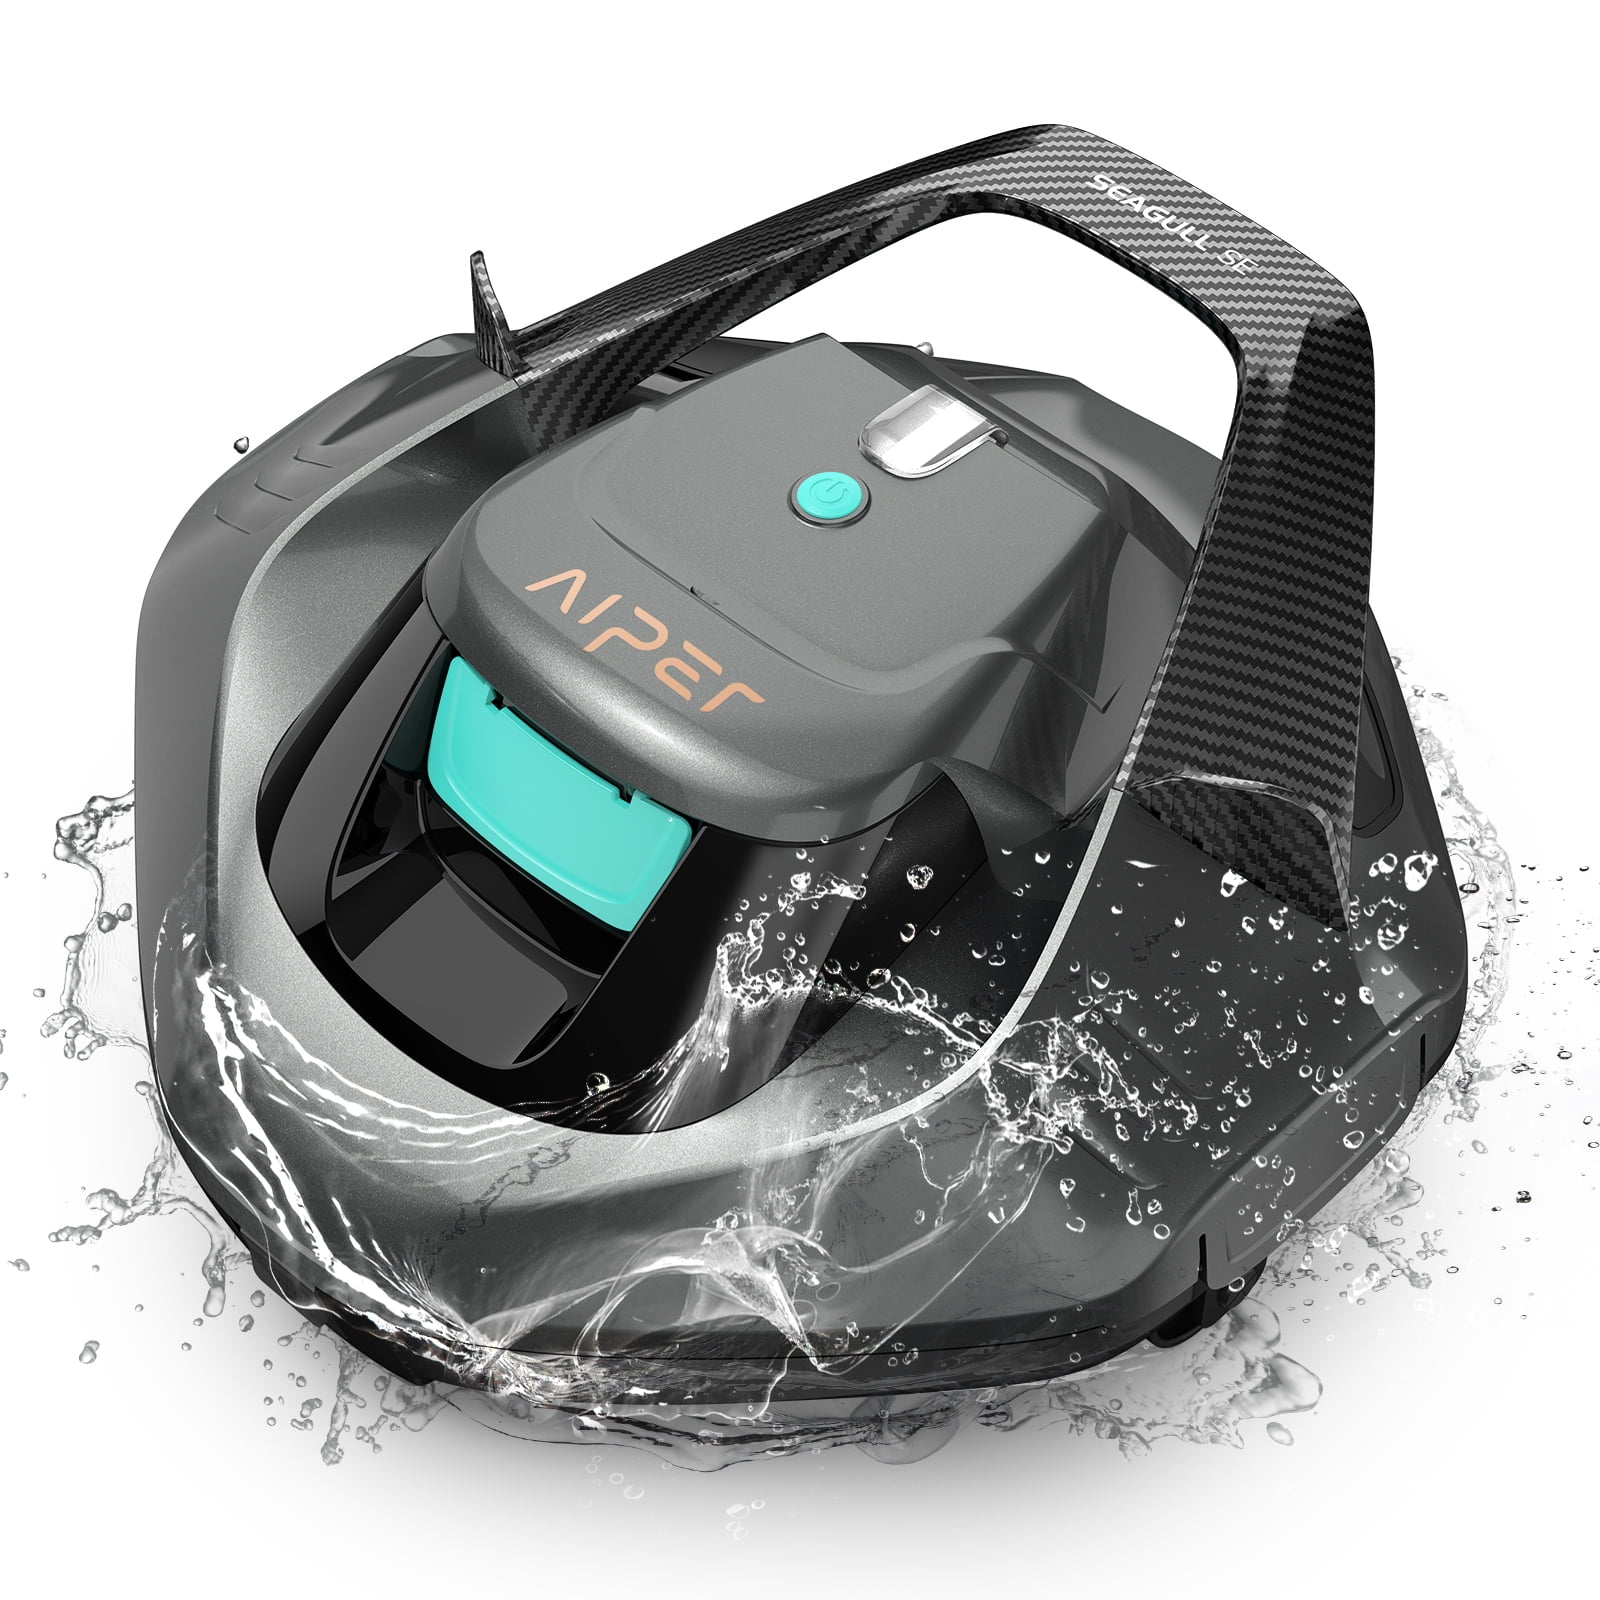 AIPER Cordless Robotic Automatic Pool Cleaner Vacuum with Chemical Dispensers